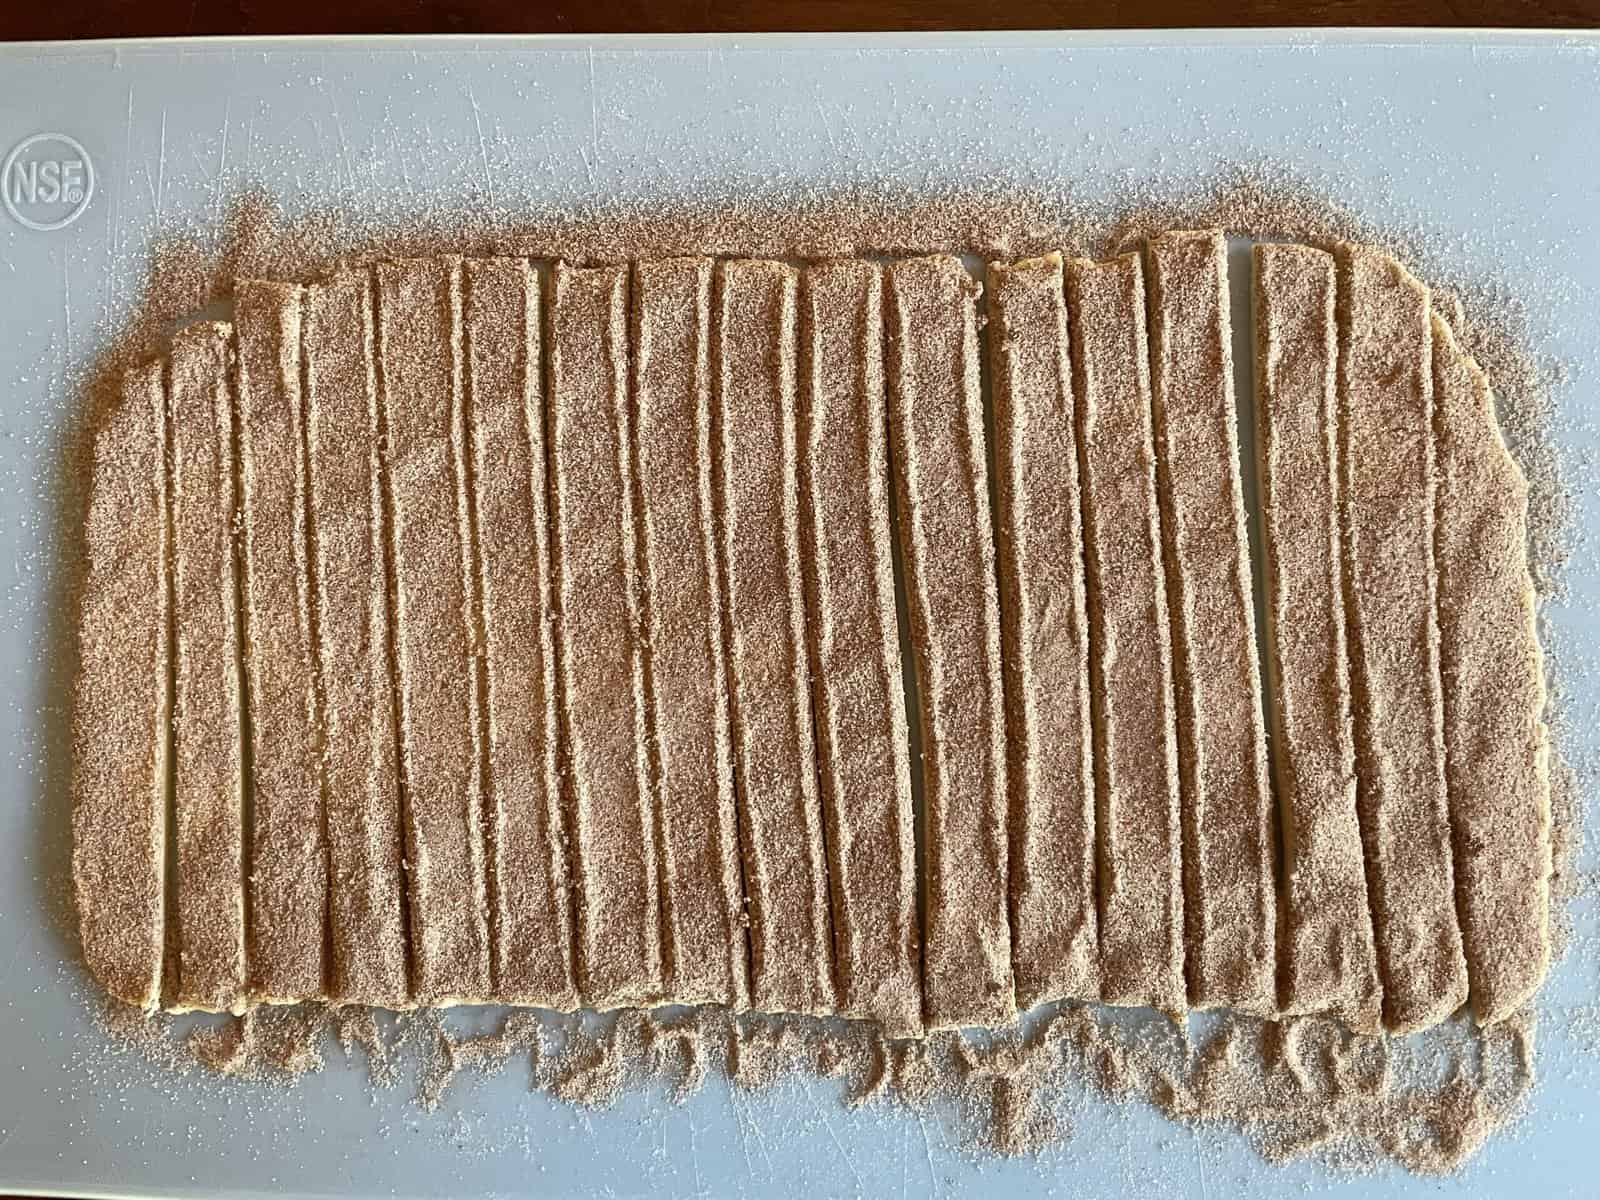 strips of pastry dough covered in cinnamon sugar.